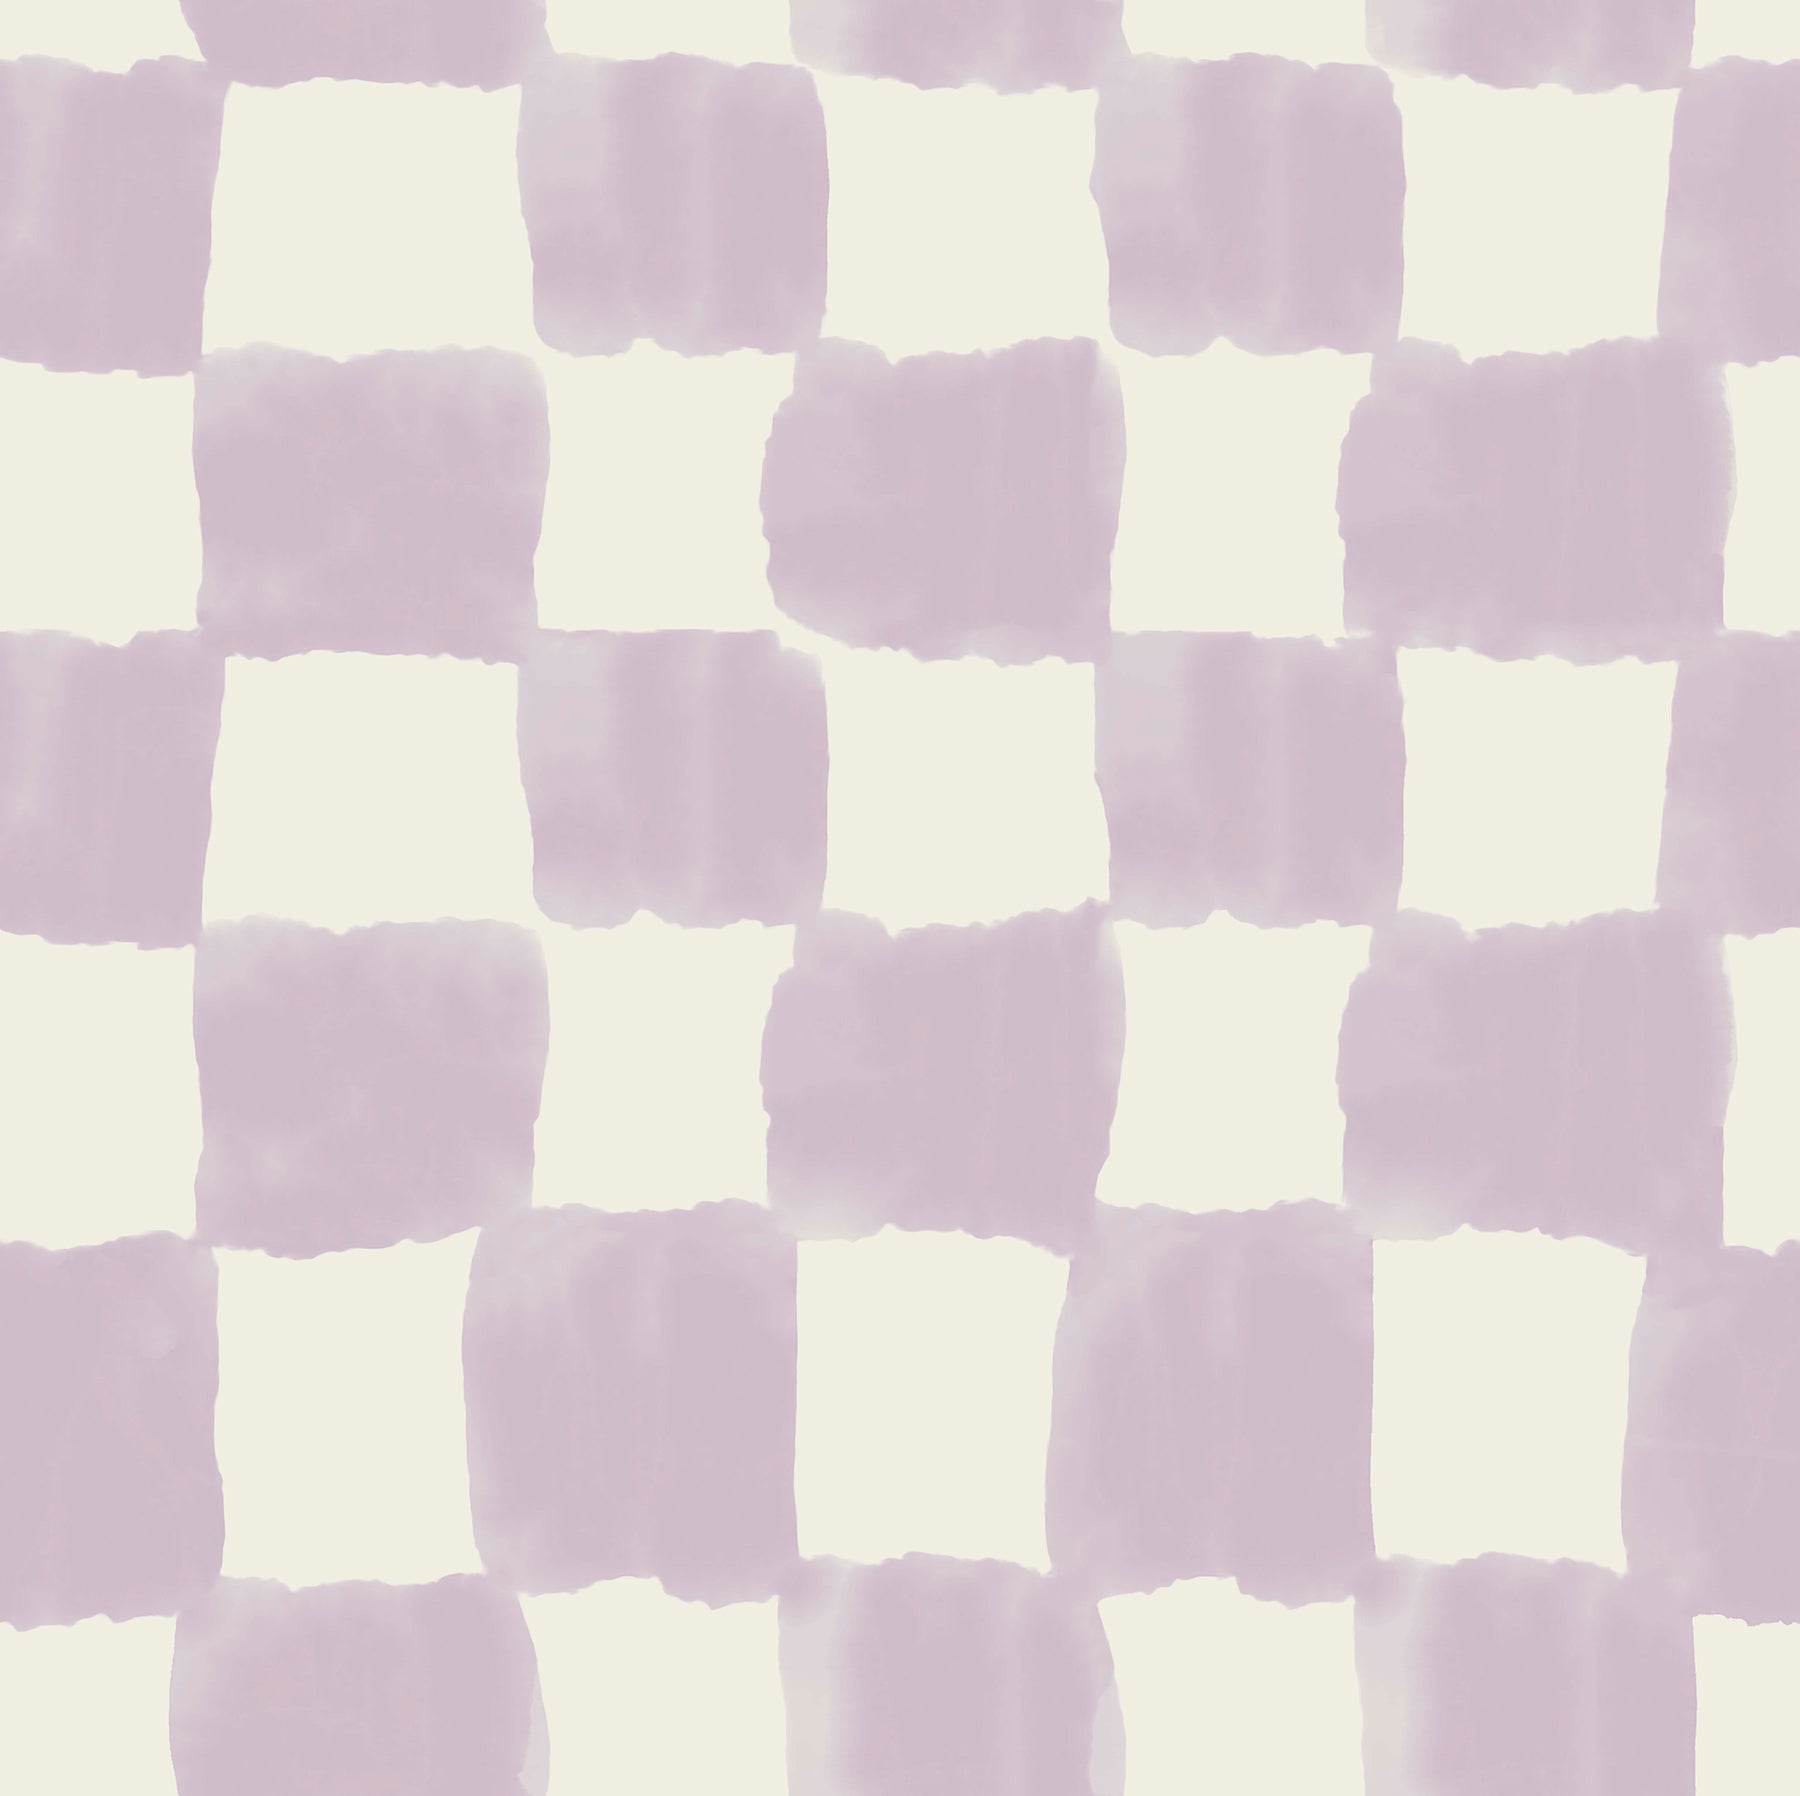 Mr. Kate Tess Watercolor Checker Peel and Stick Wallpaper Peel and Stick Wallpaper RoomMates Roll Soft Lavender 